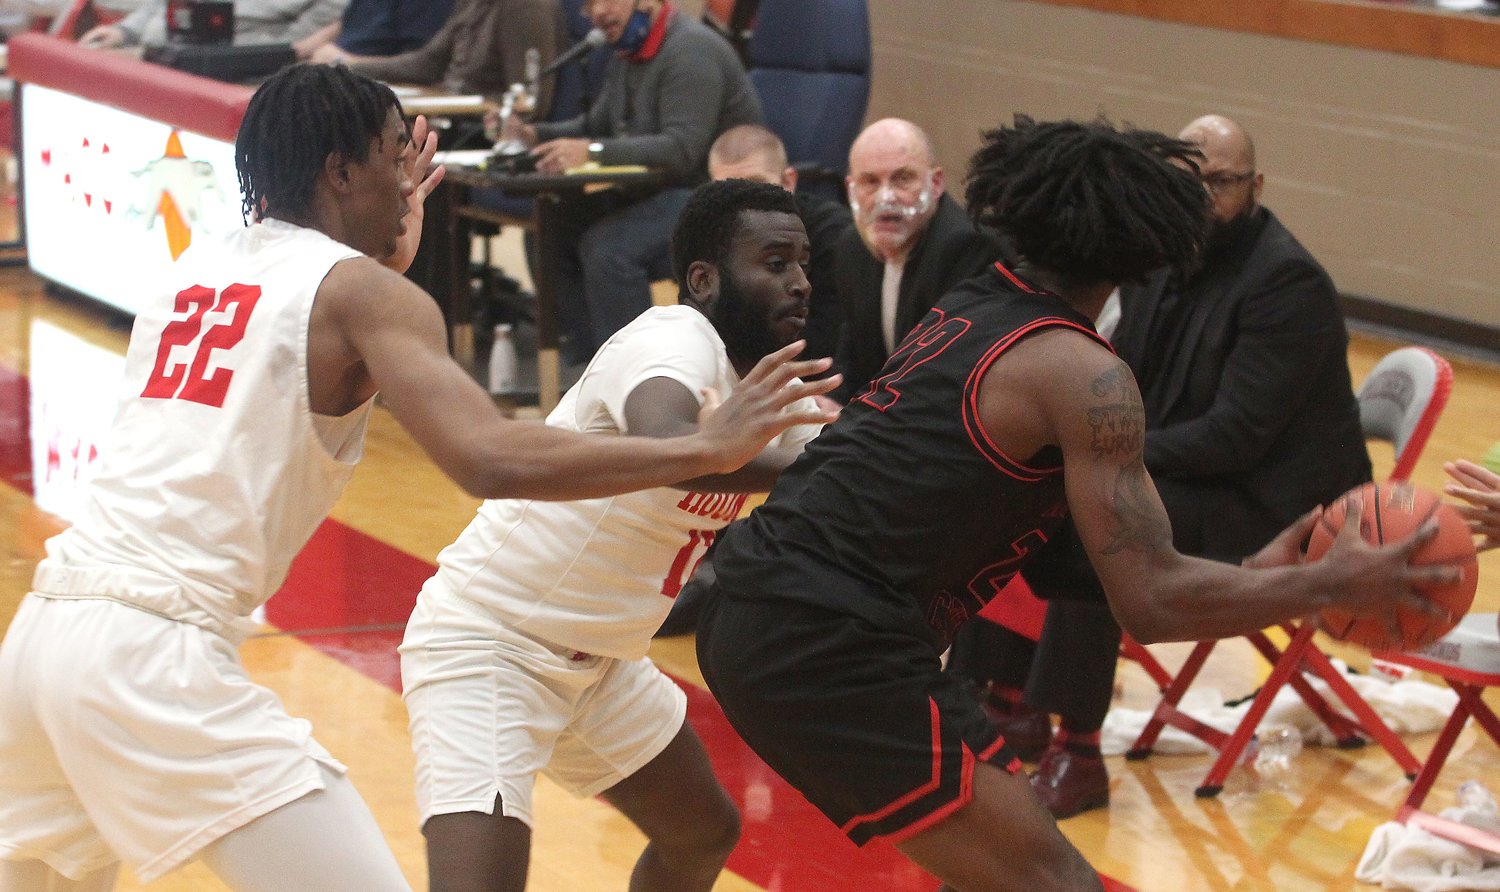 Moberly Area Community College's Makalani Kafele (#22) and Tyen Moore trap Atavian Butler of North Central Missouri College in Trenton (with ball) while the Greyhounds apply a full court press Tuesday. MACC men needed overtime to grind out a 110-109 home triumph against the Pirates.